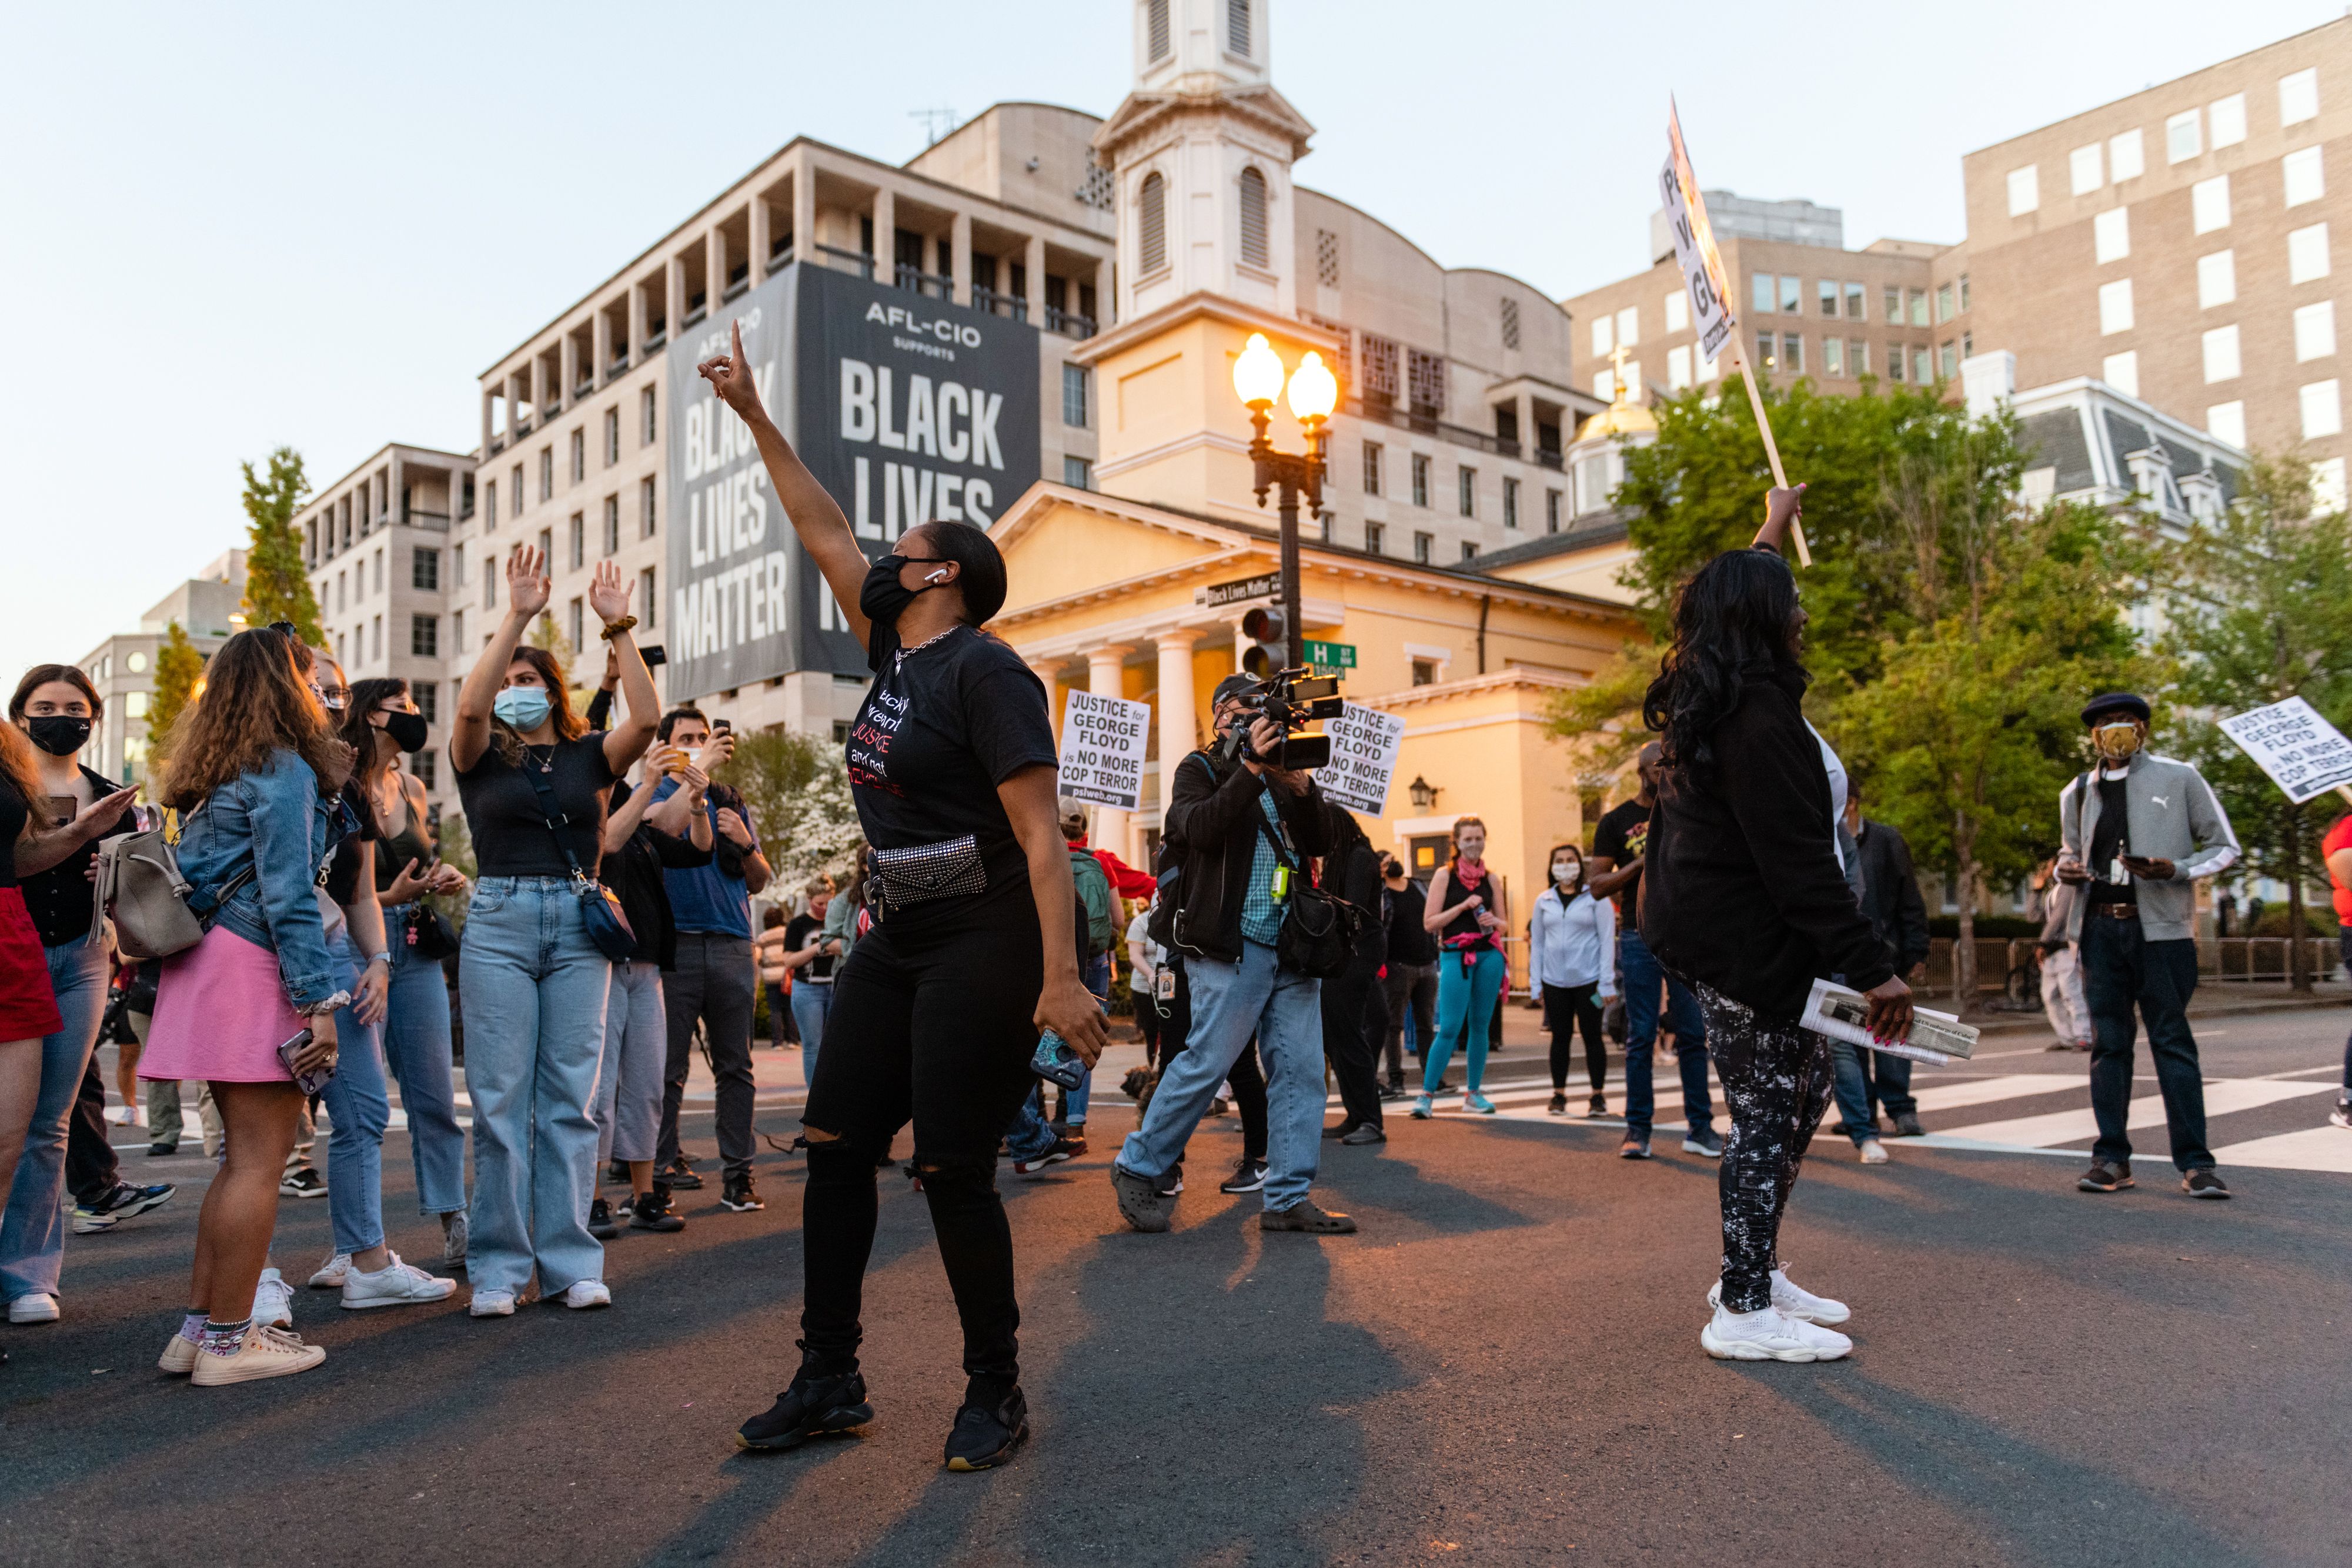 People celebrate after the verdict is announced in the trial of former Minneapolis police officer Derek Chauvin at Black Lives Matter Plaza in Washington, D.C.